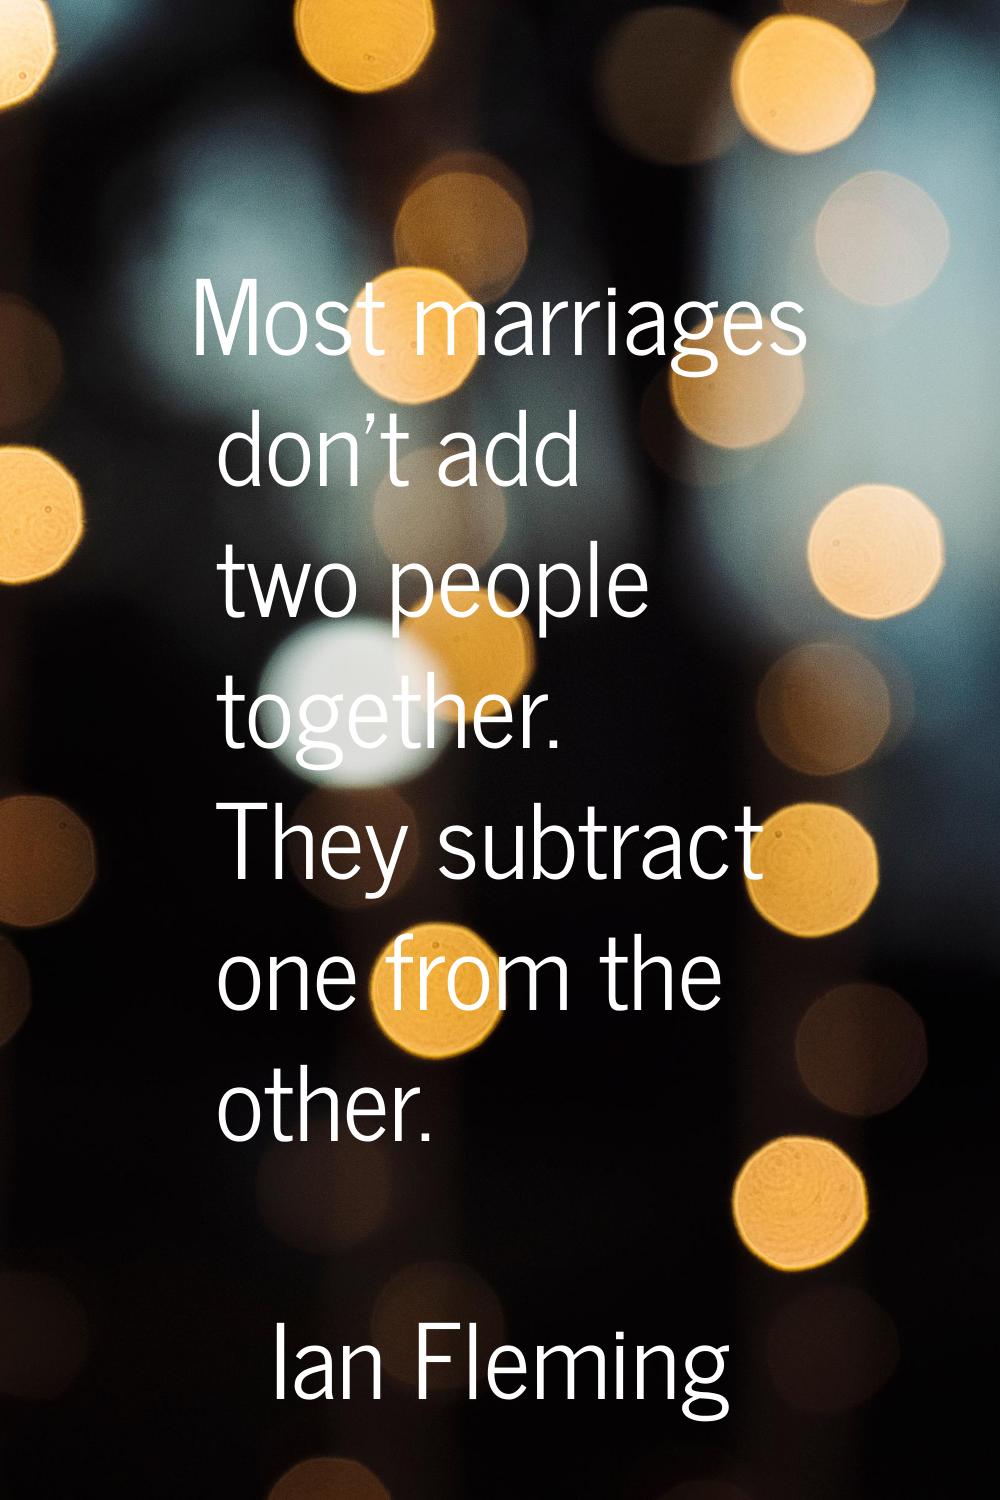 Most marriages don't add two people together. They subtract one from the other.